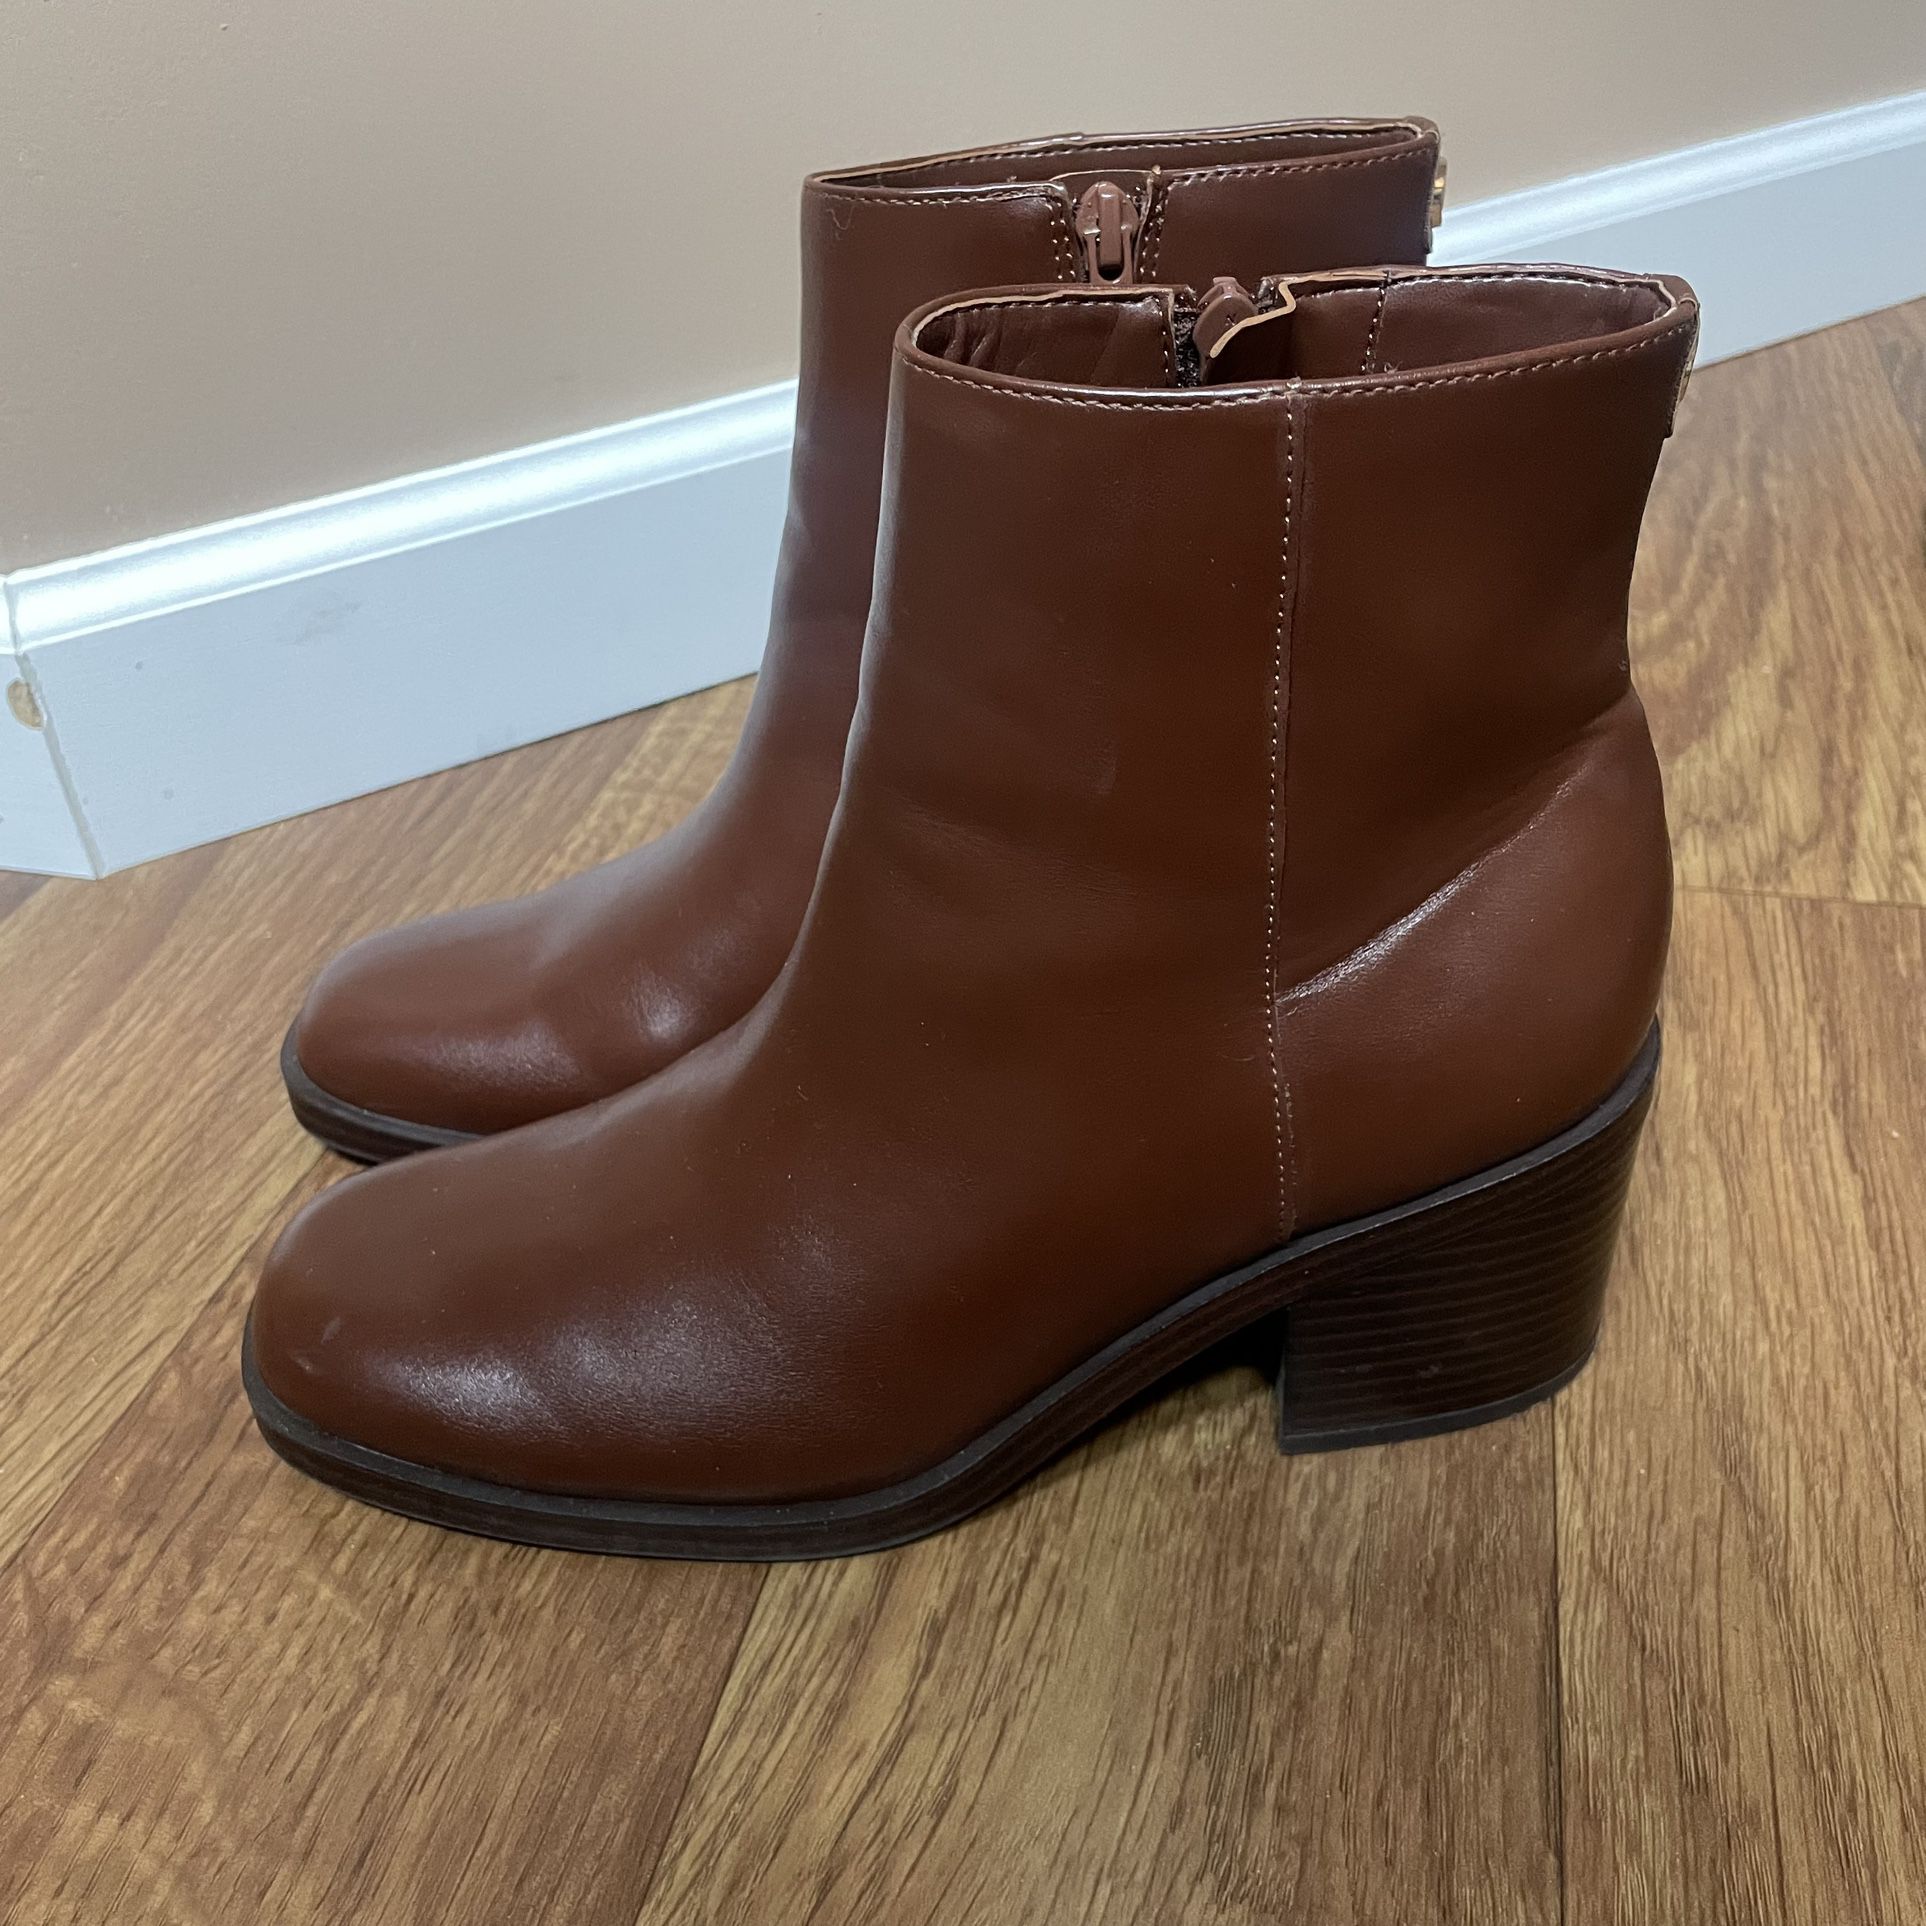 Nine West Brown Booties / Boots Size 8 *WORN ONCE*